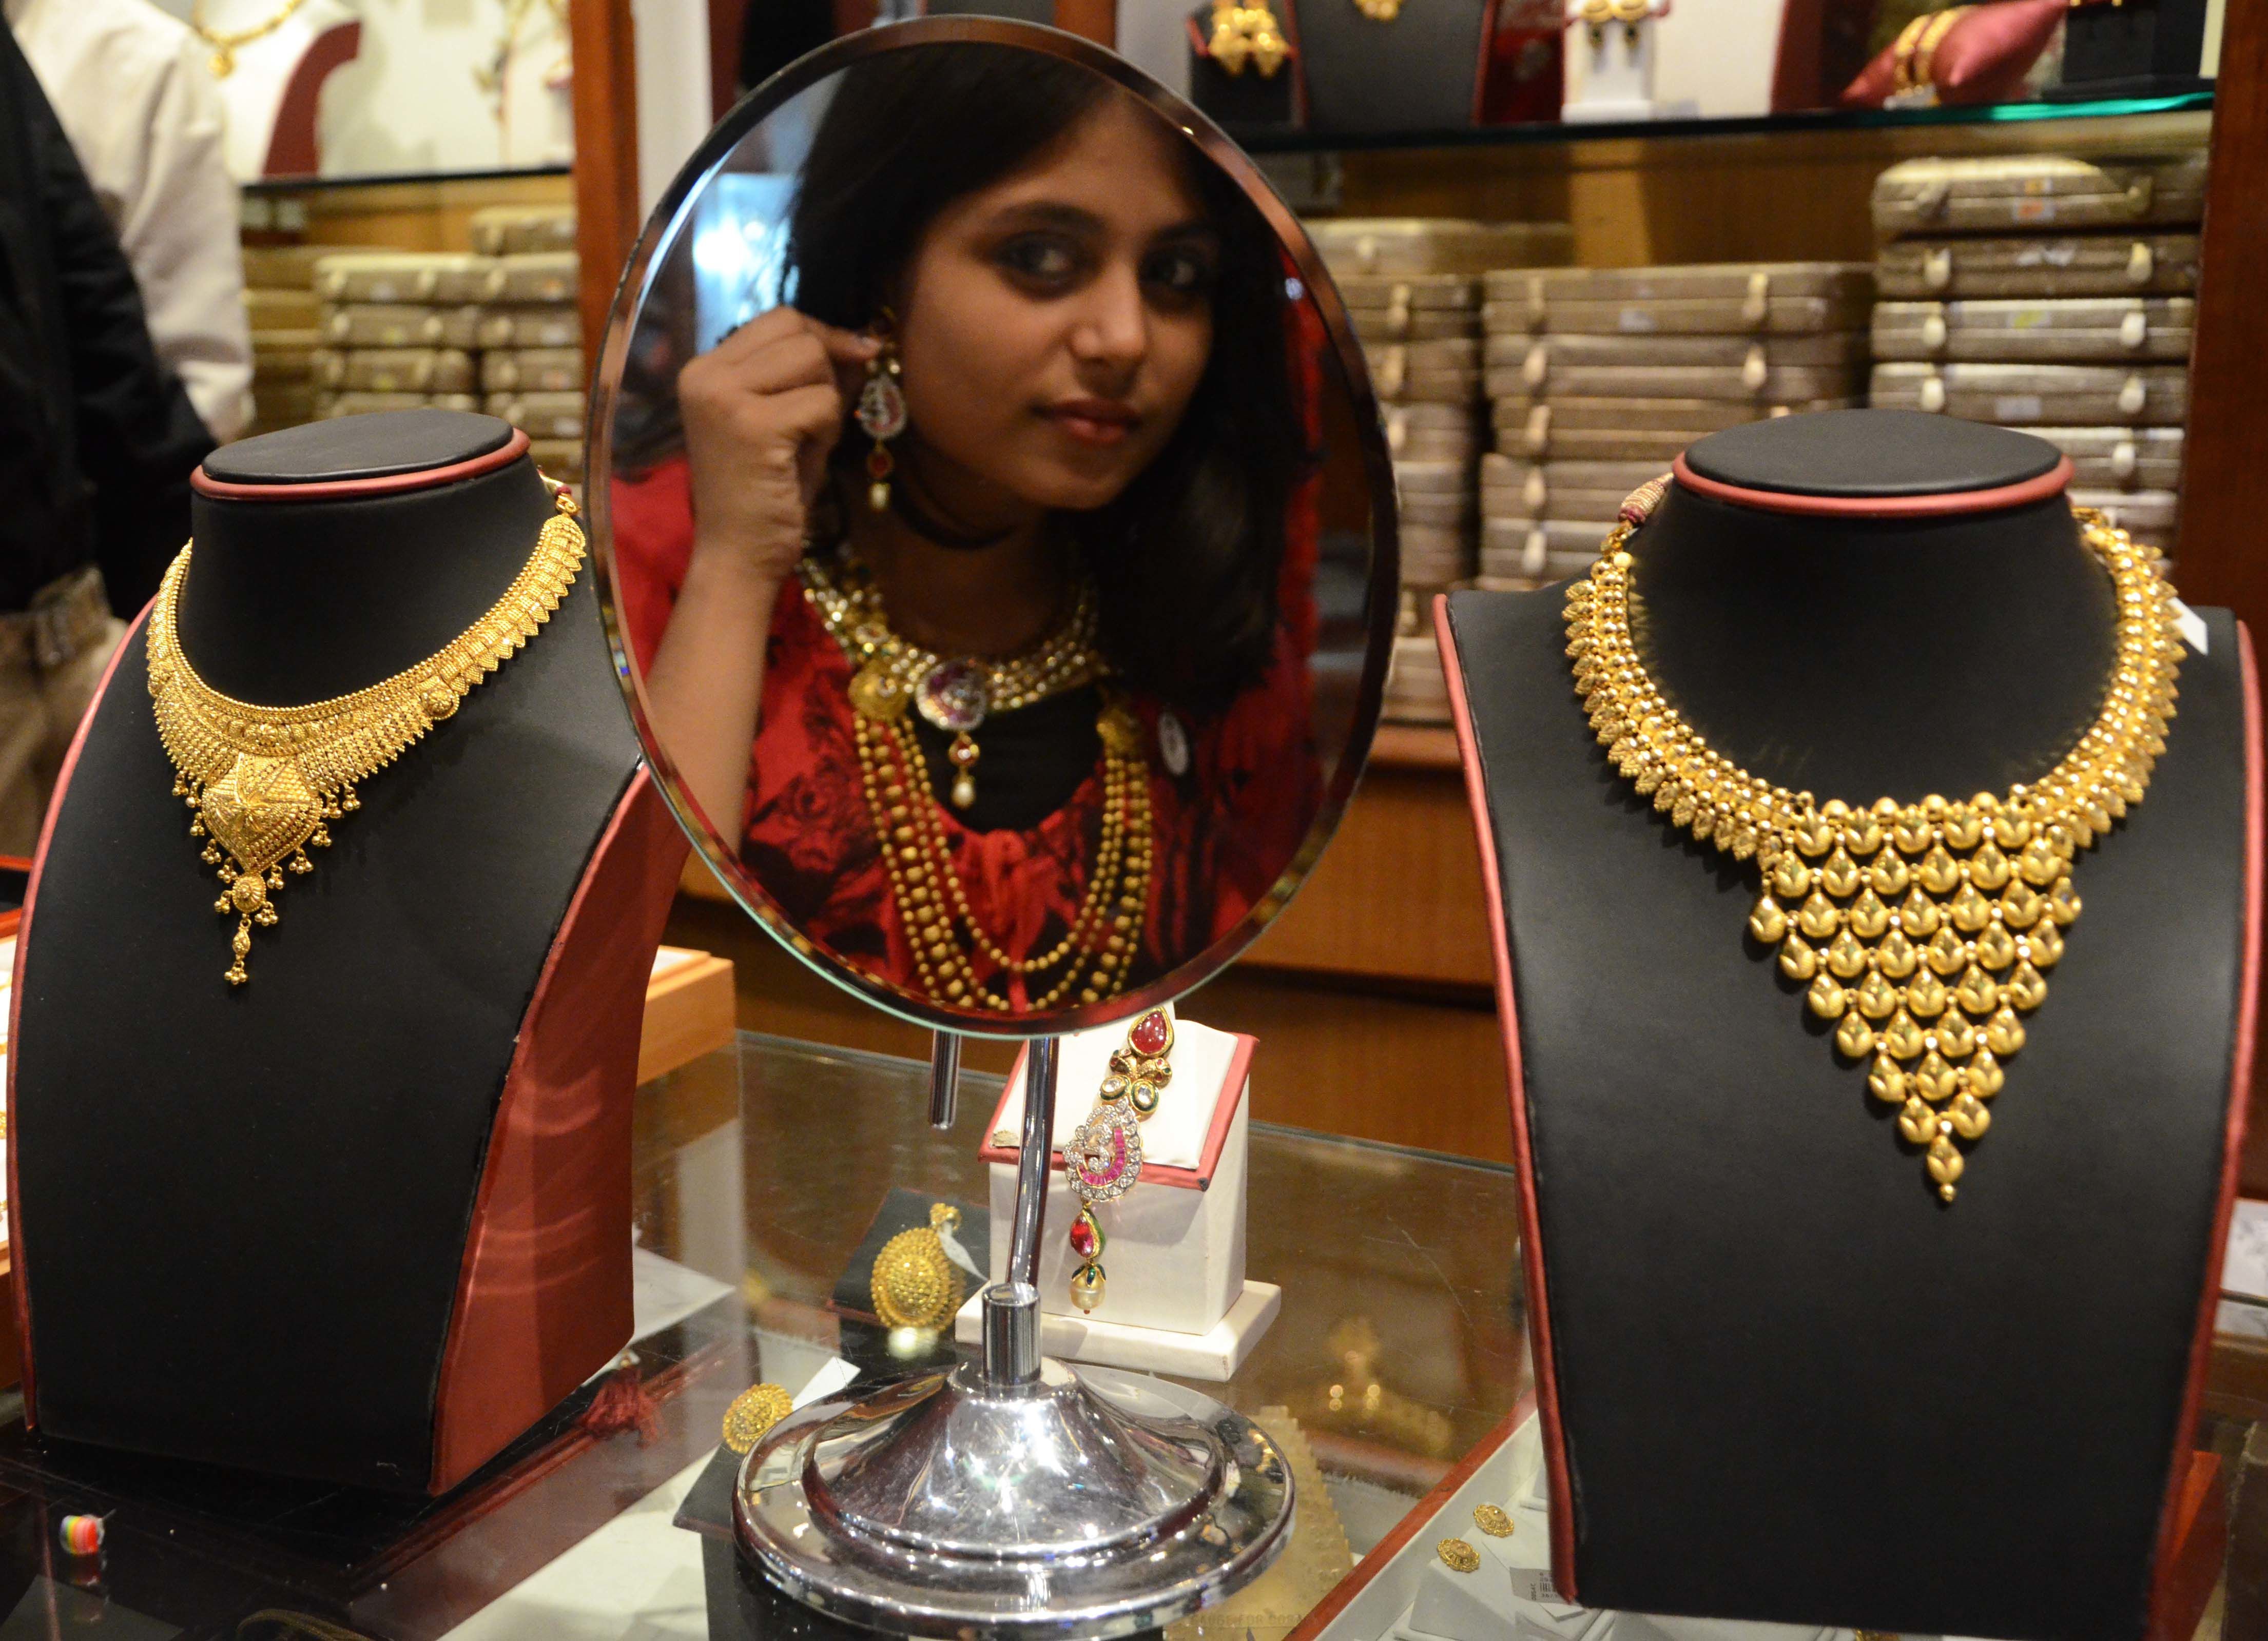 Gold Prices See a Decline, Silver on the Rise